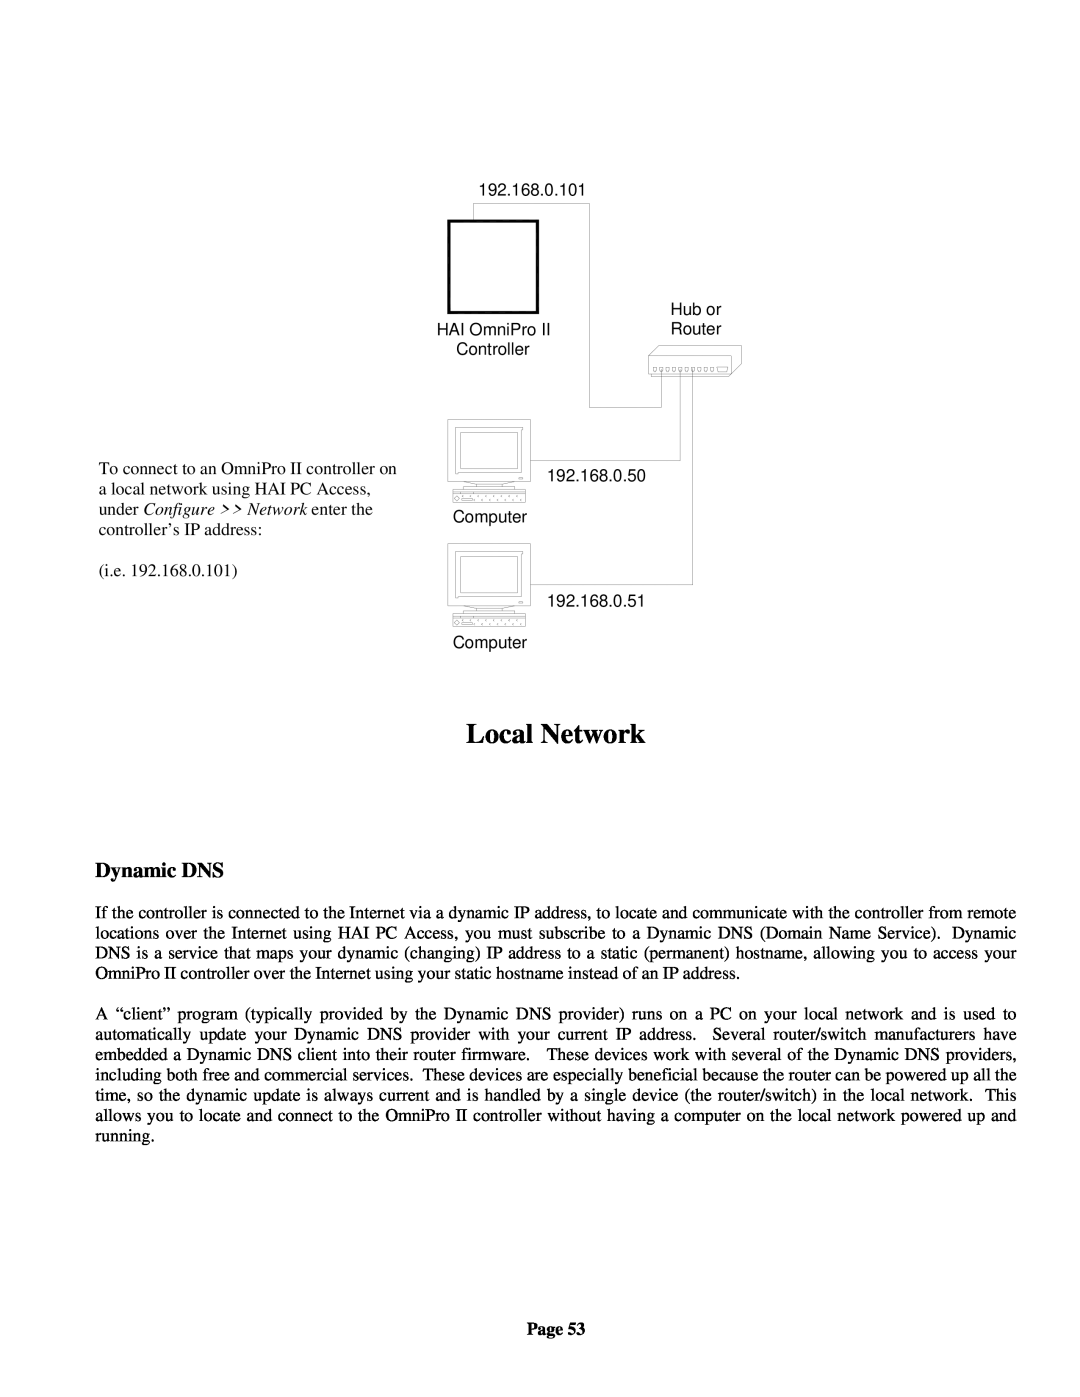 Home Automation OmniPro II owner manual Local Network, Dynamic DNS, Page 